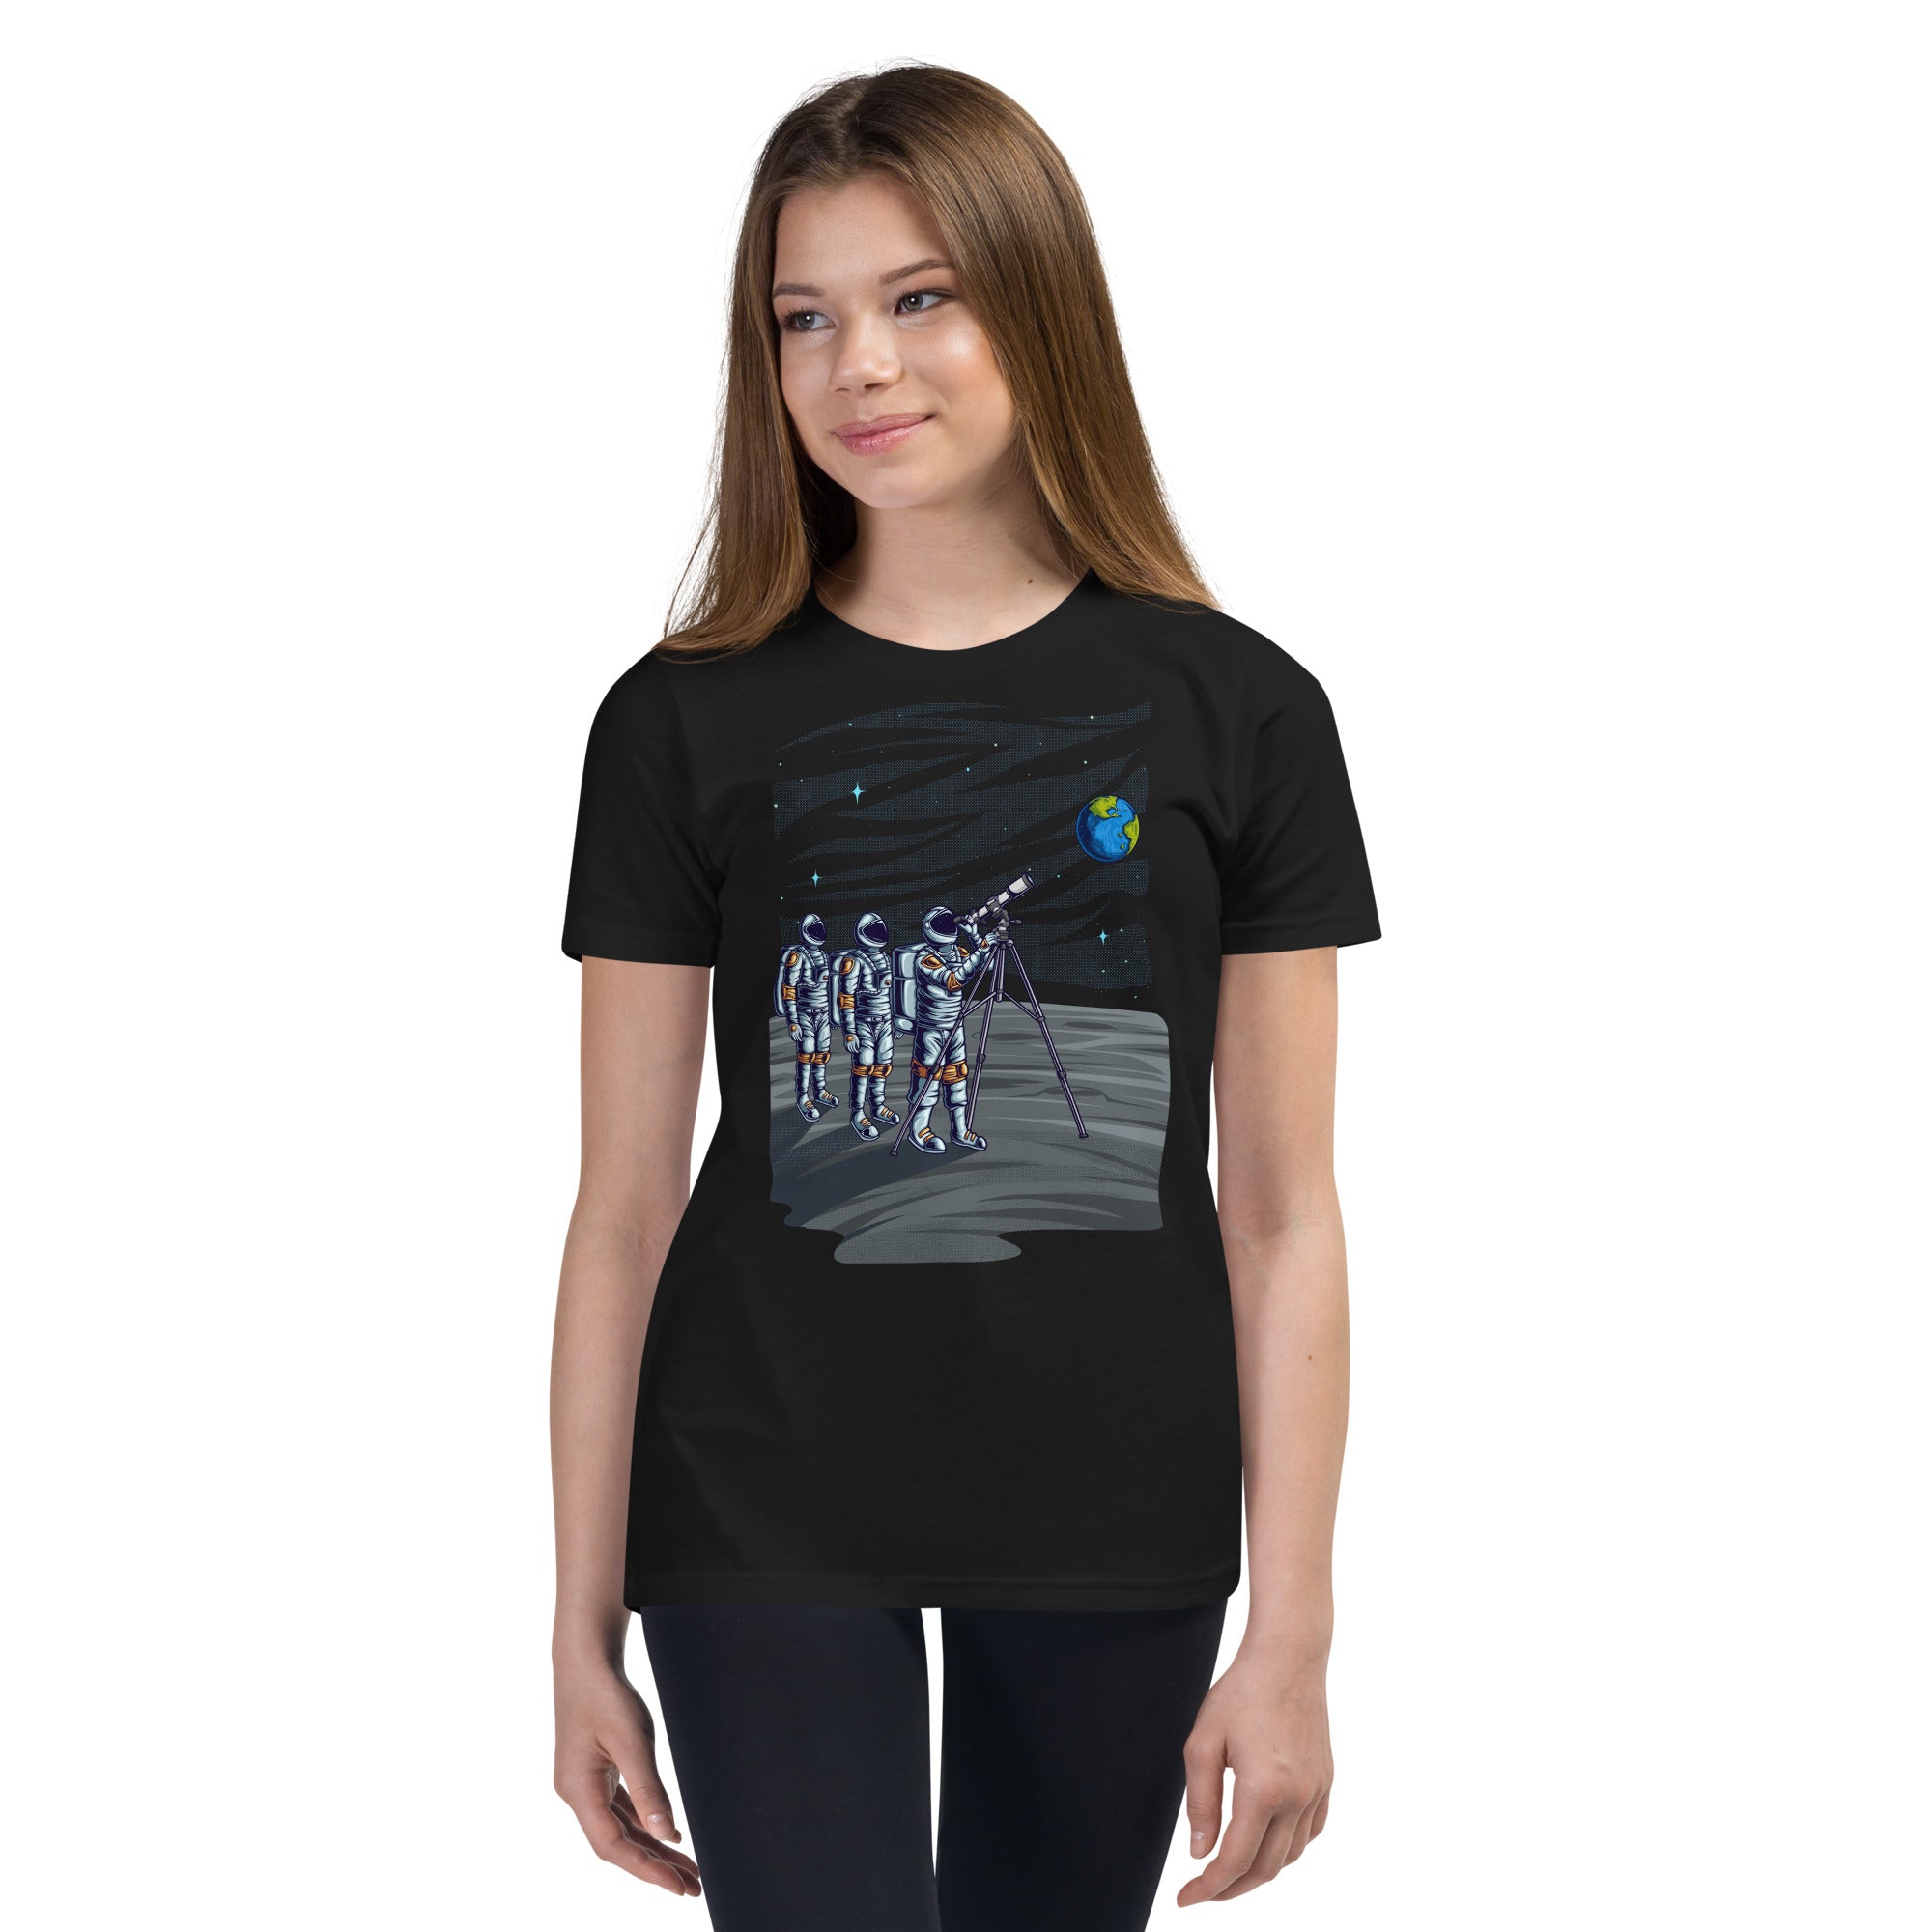 Astronauts on Lunar Surface looking at Earth in Youth Short Sleeve T-Shirt - The Space Store